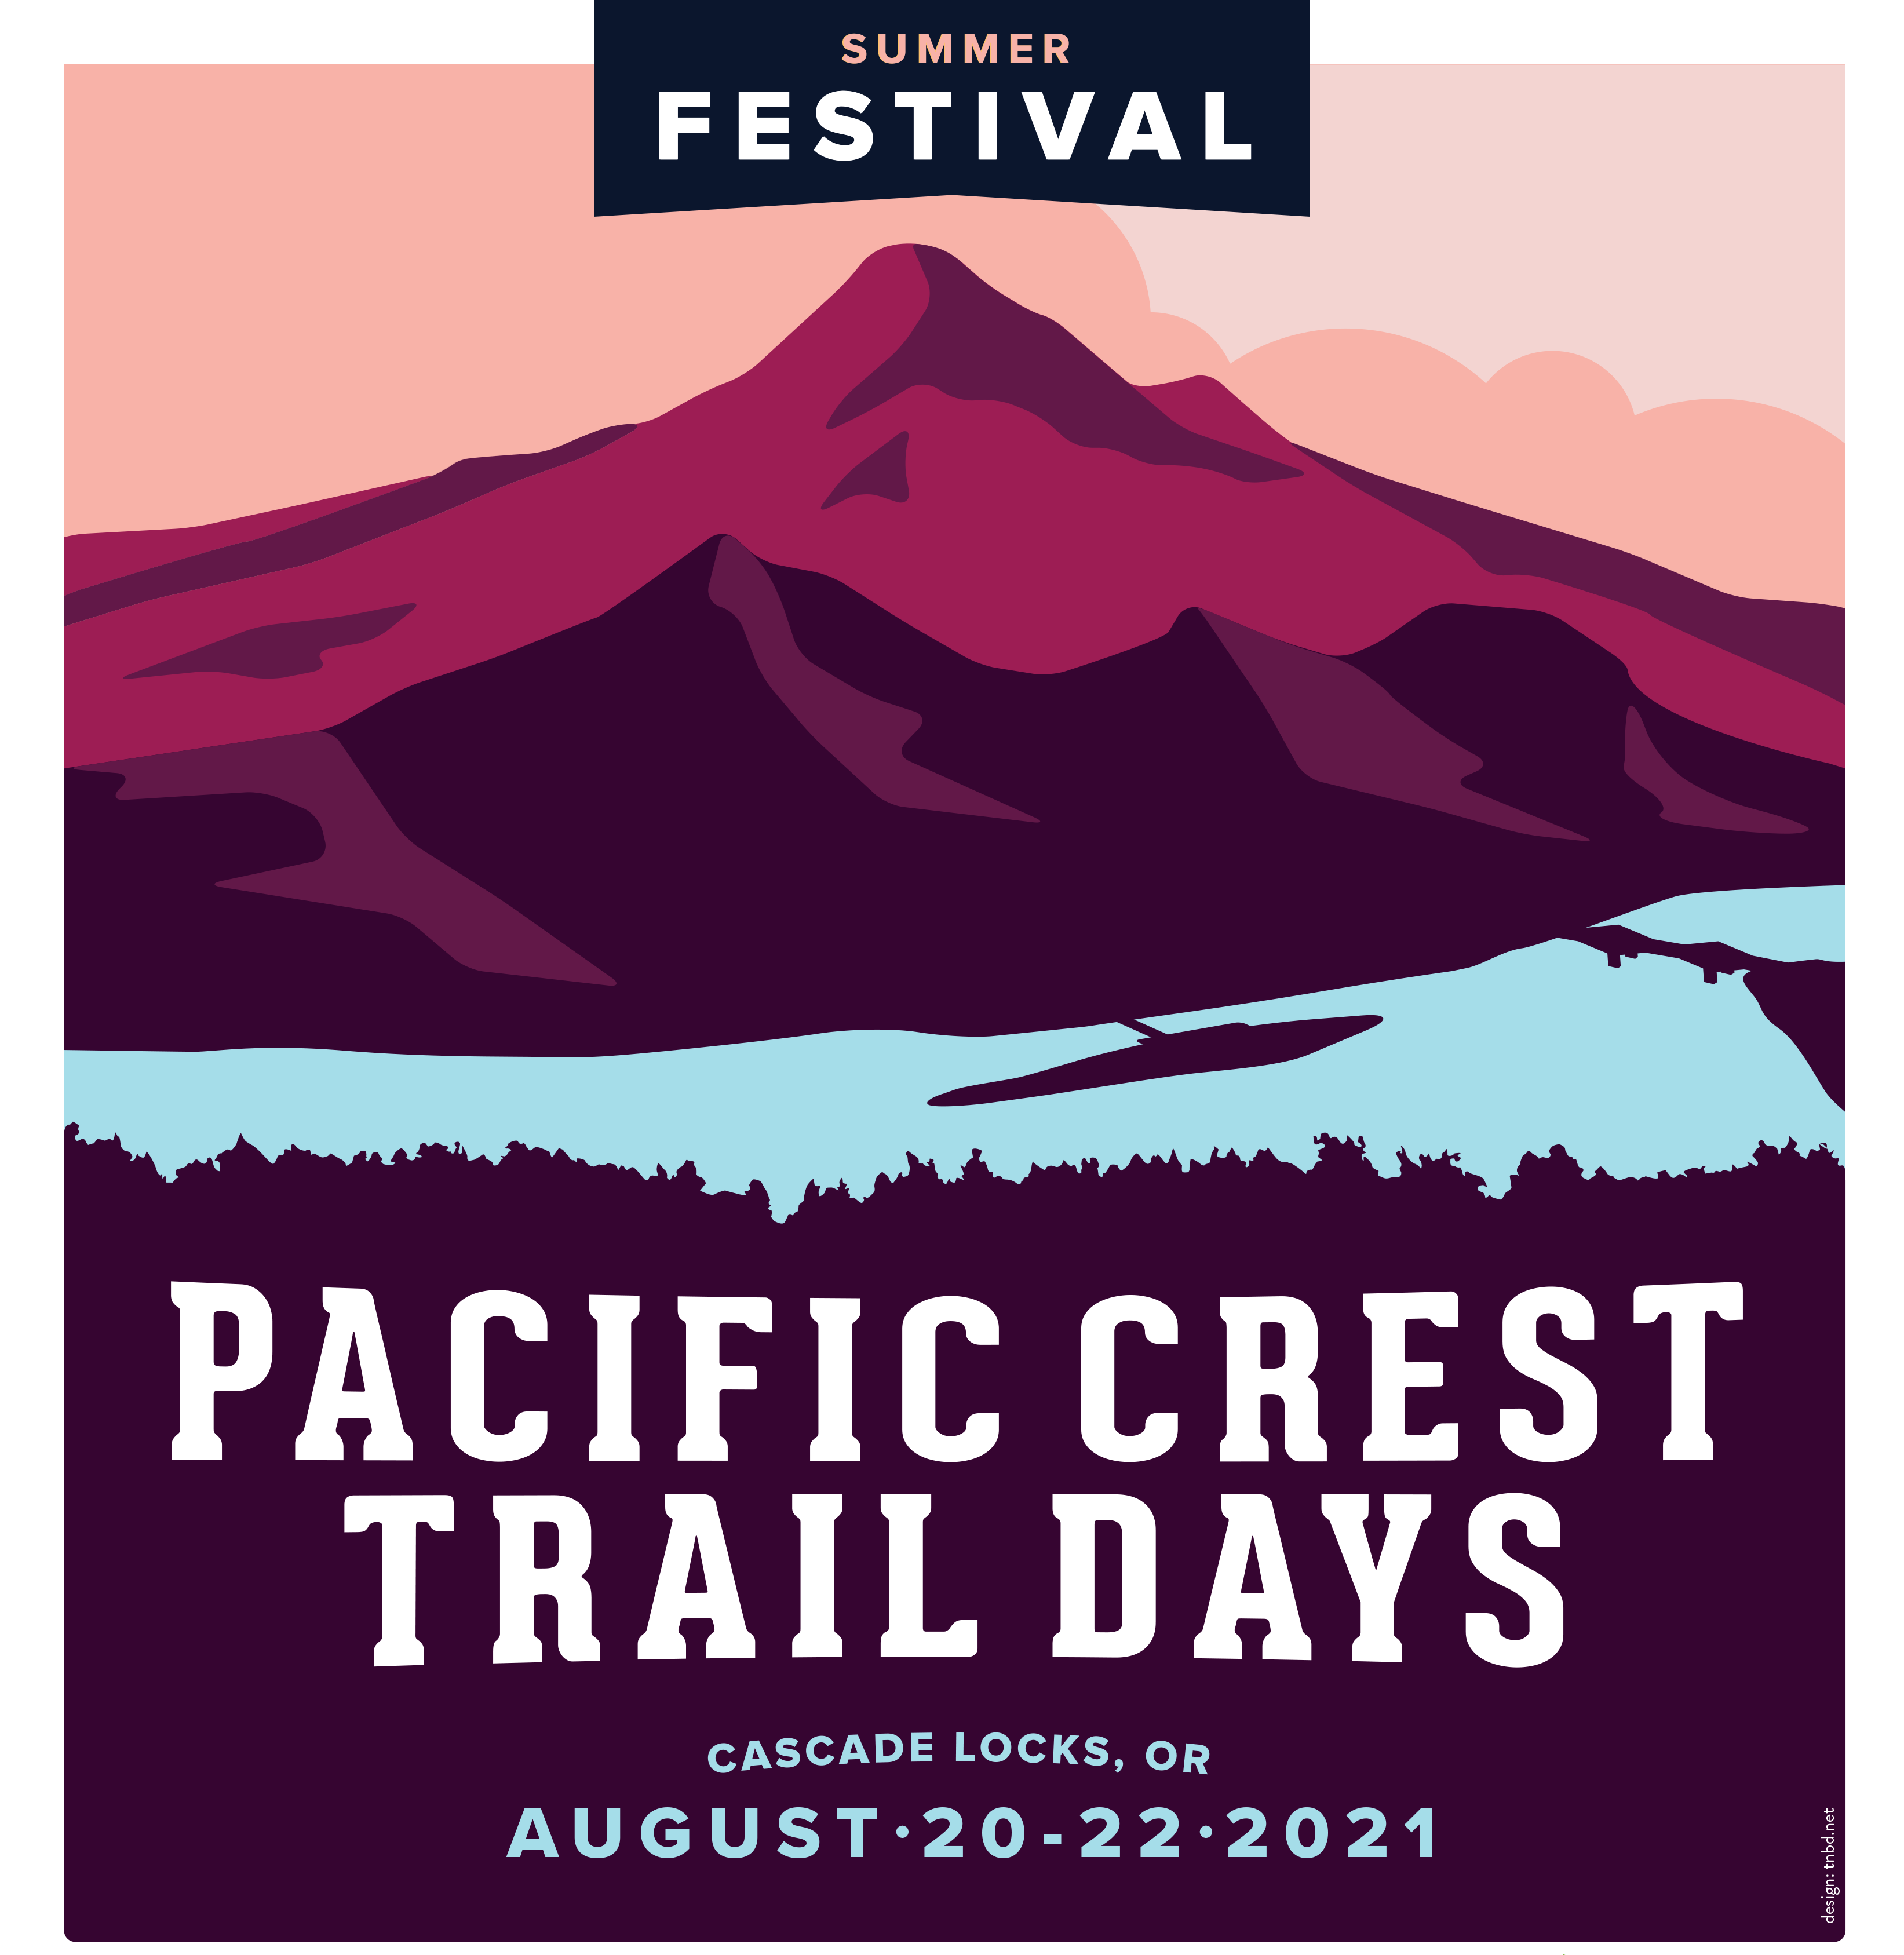 Pacific Crest Trail Days